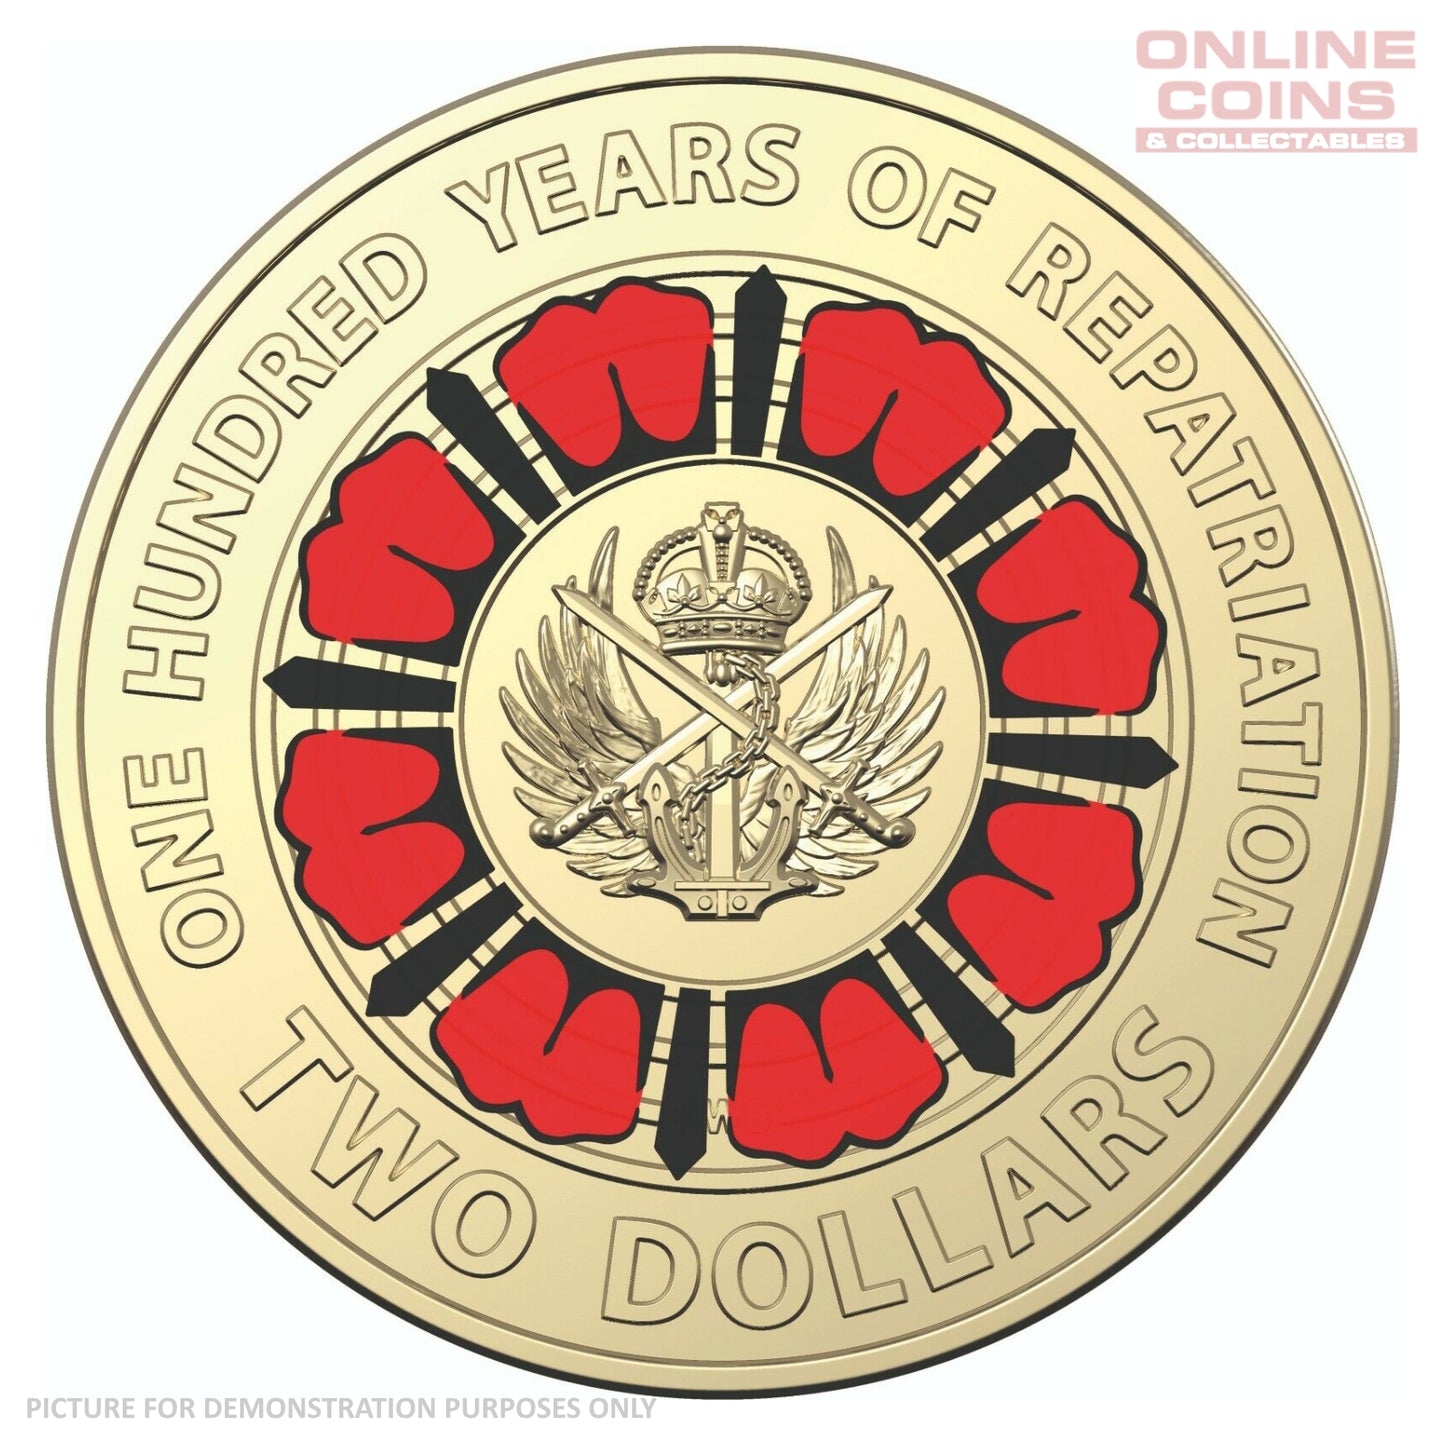 2019 RAM $2 Coloured Circulated Loose Coin - A Century Of Repatriation